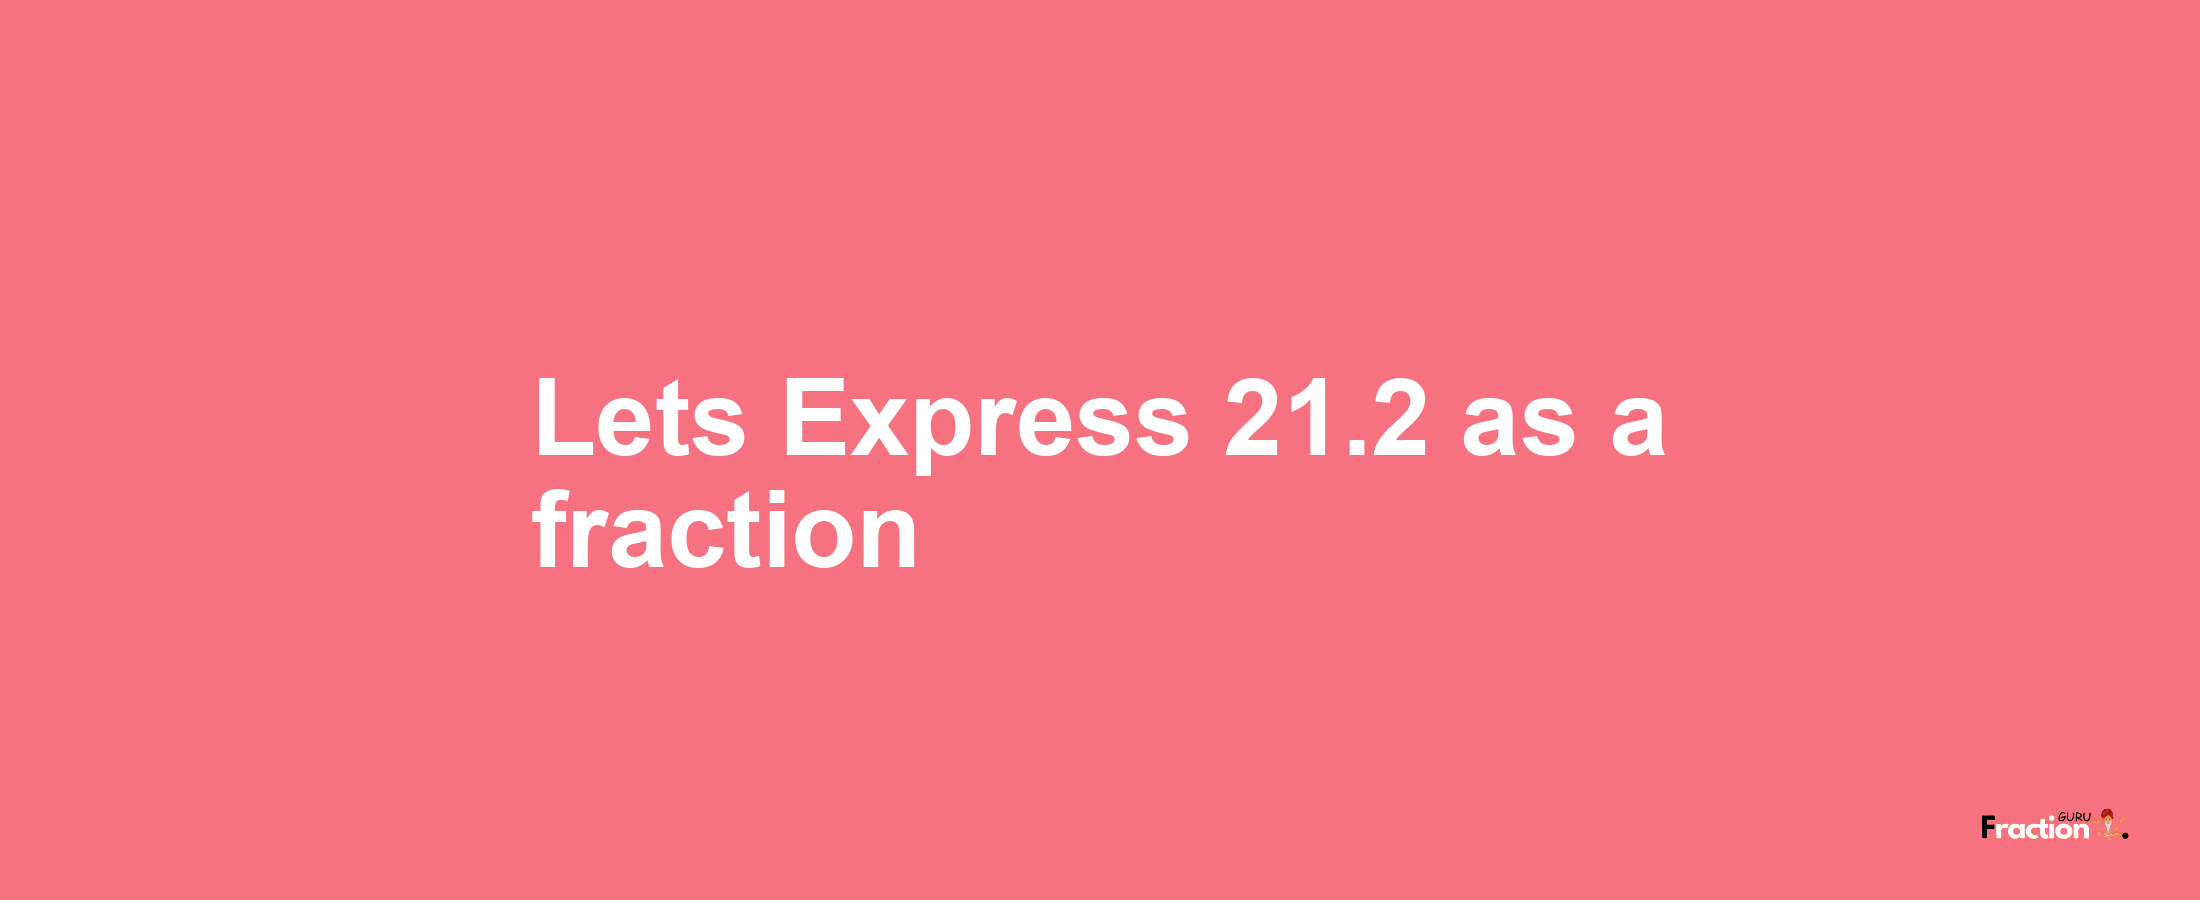 Lets Express 21.2 as afraction